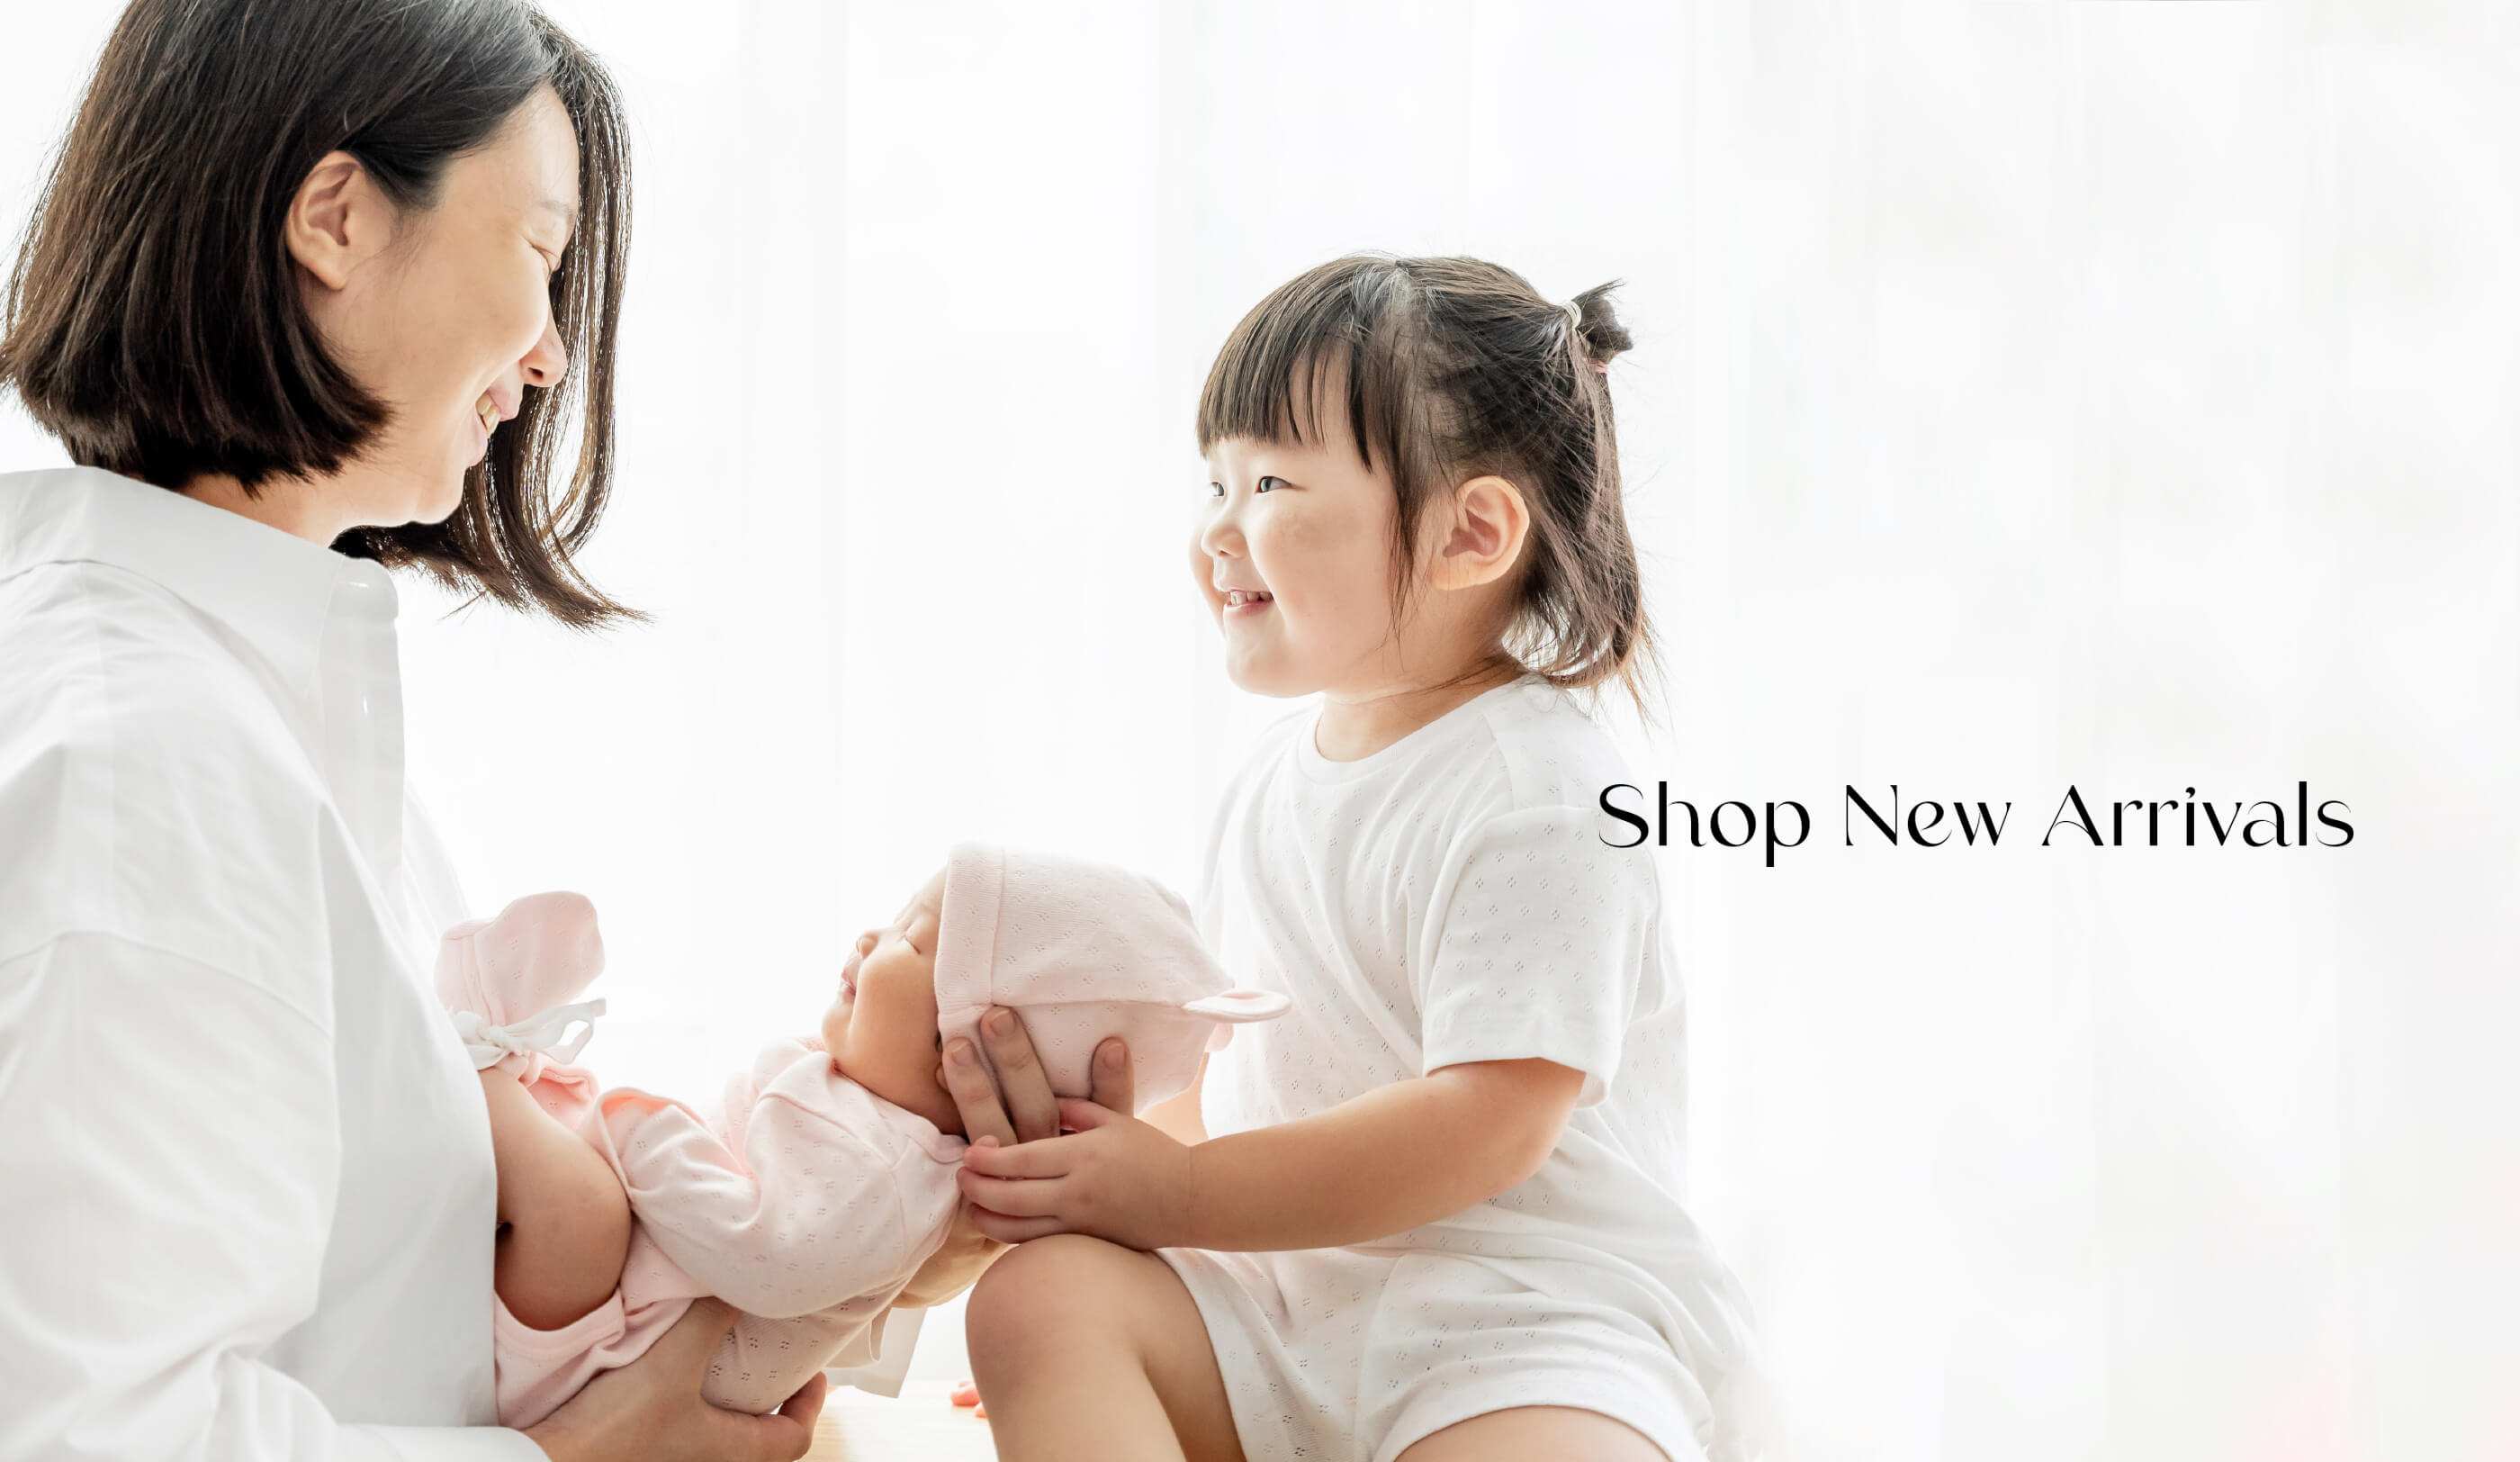 New Arrivals, Baby, Kids, Loungewear, Resort, Going out, Family